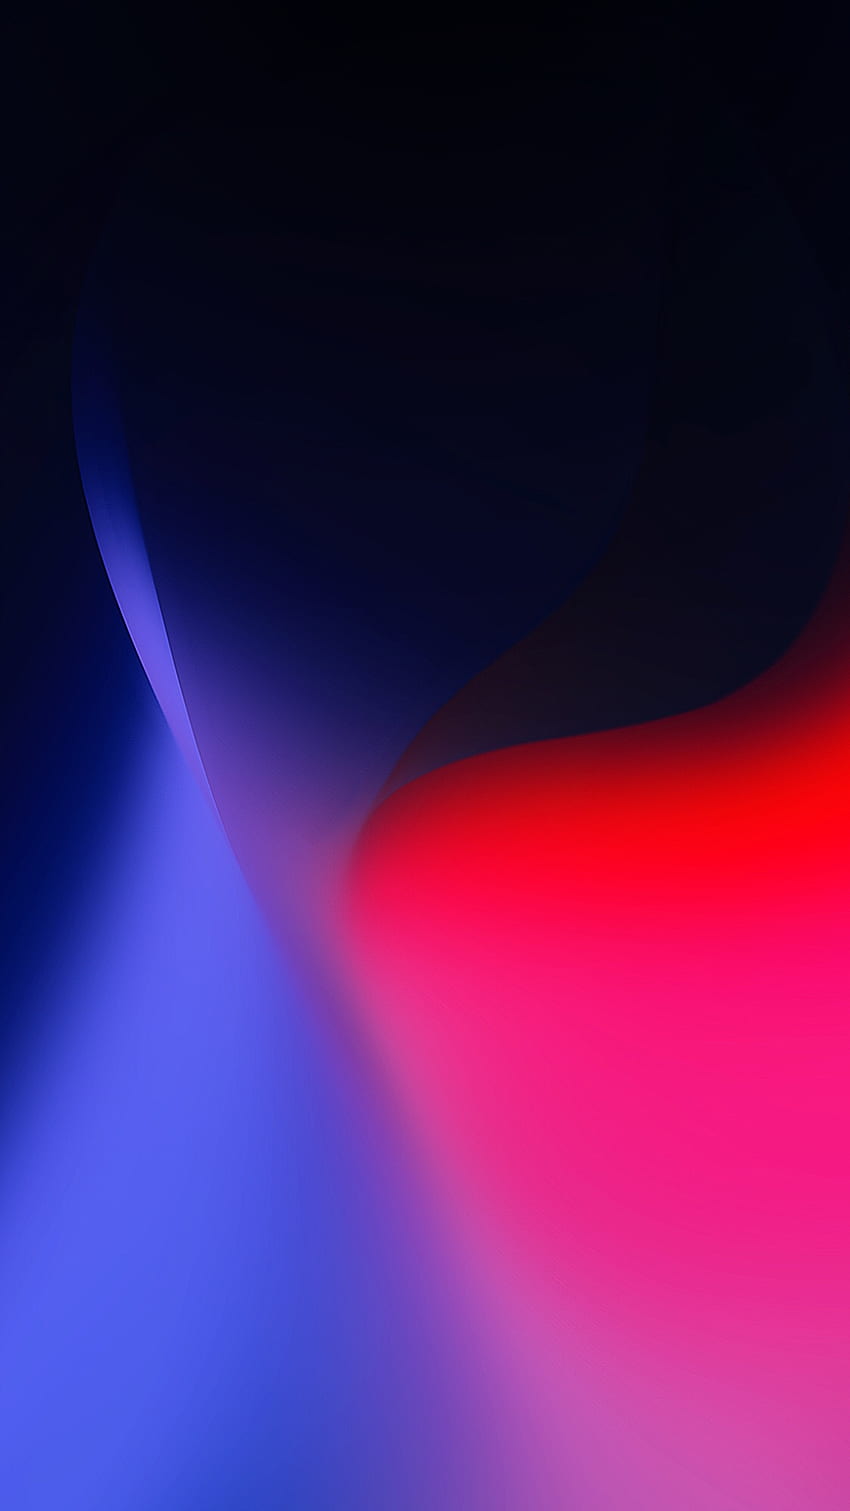 Minimal gradient wallpapers to hide the iPhone notch